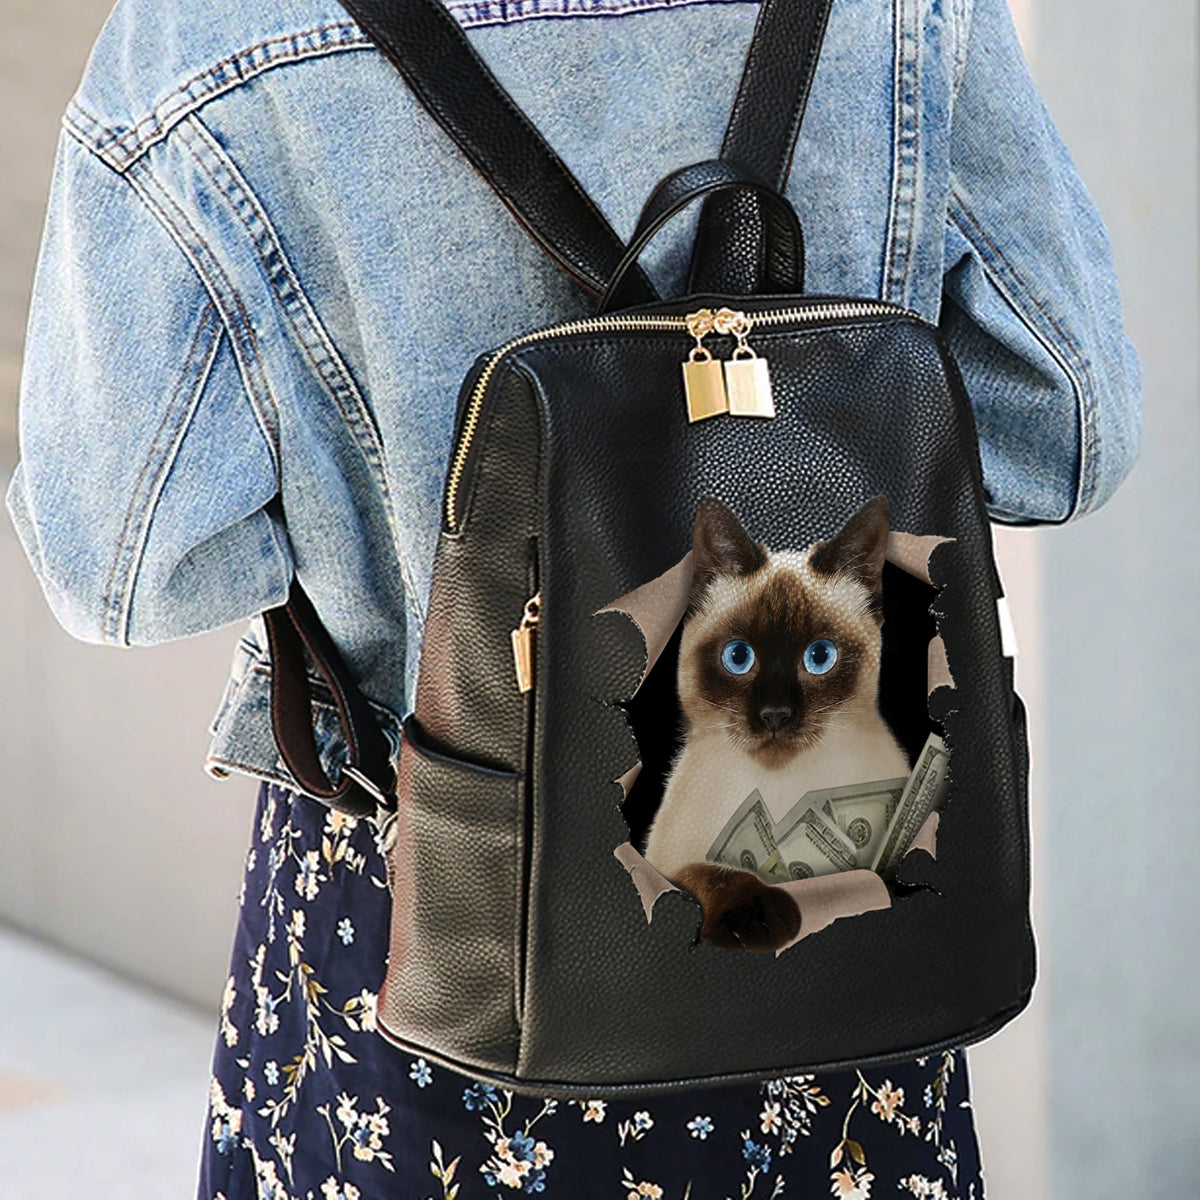 It's All Mine - Siamese Cat Backpack V1